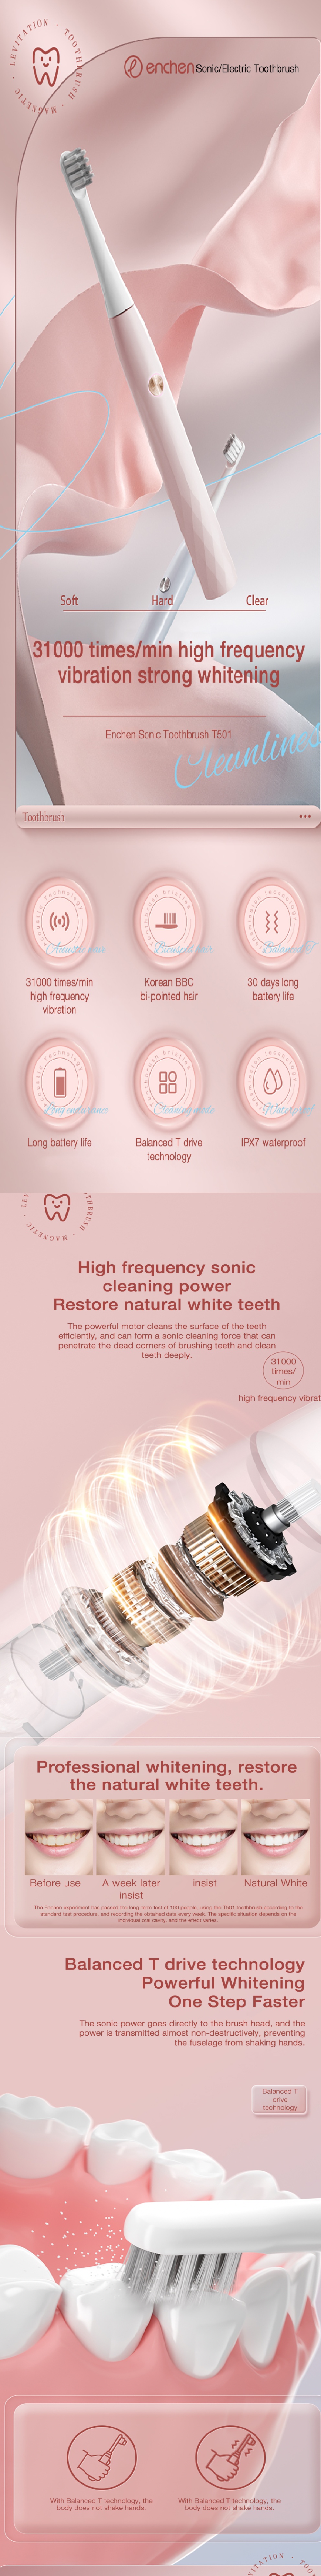 Enchen-T501-Electric-Toothbrush-High-frequency-Vibration-Three-Cleaning-Modes-Electric-Toothbrush-Lo-1951125-1